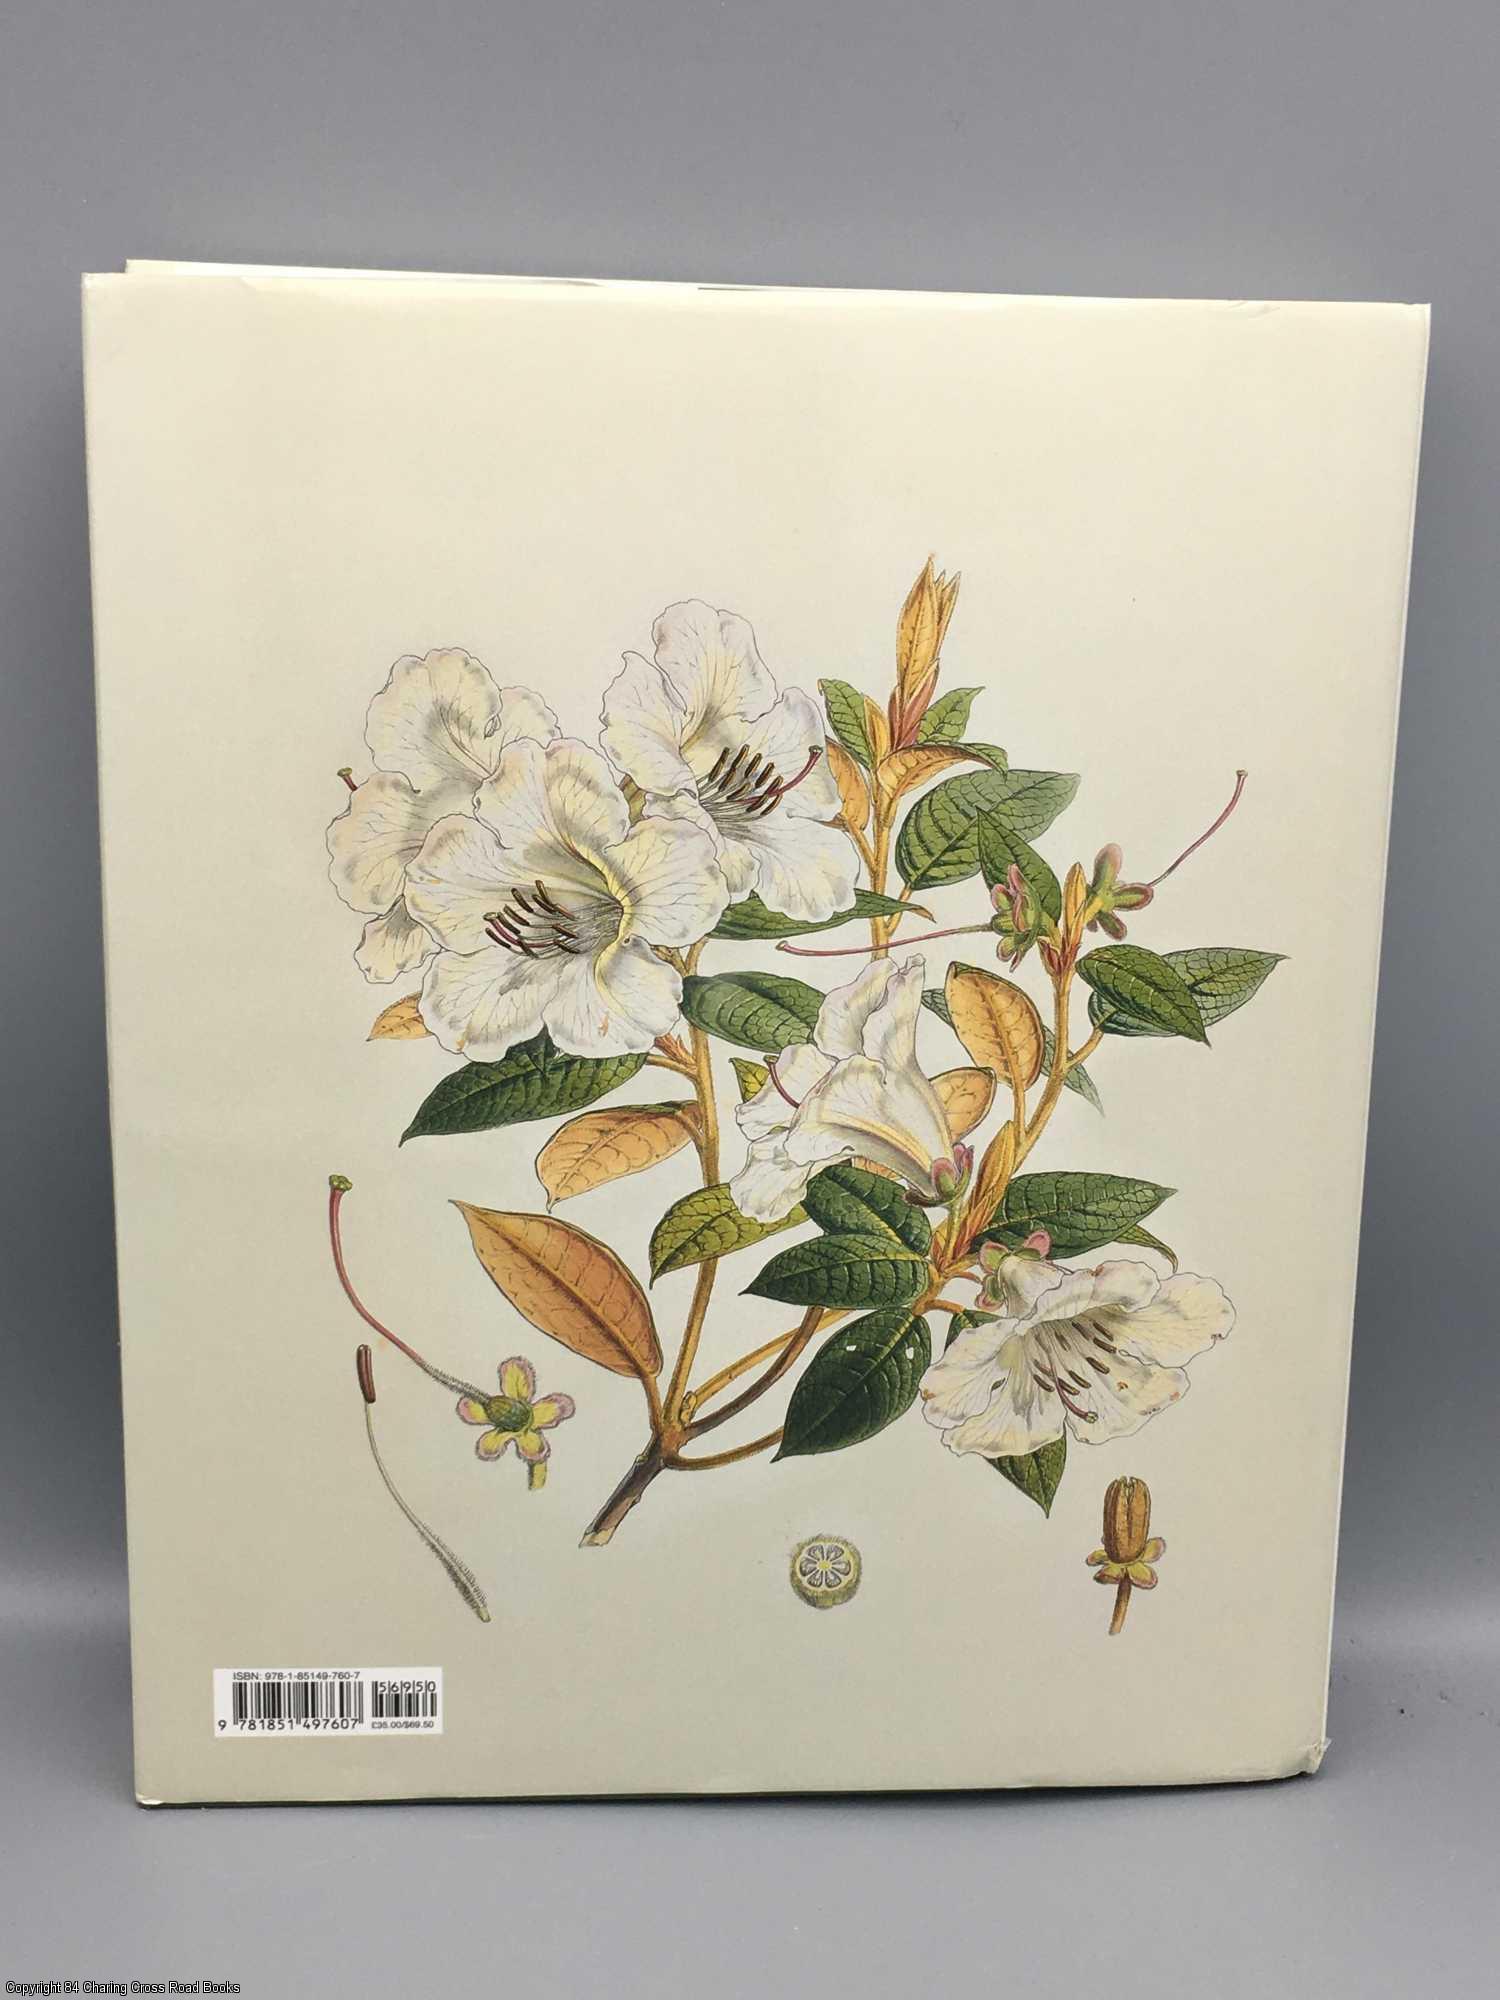 The Art of Botanical Illustration by Wilfrid Blunt, William T., Stern on 84  Charing Cross Rare Books